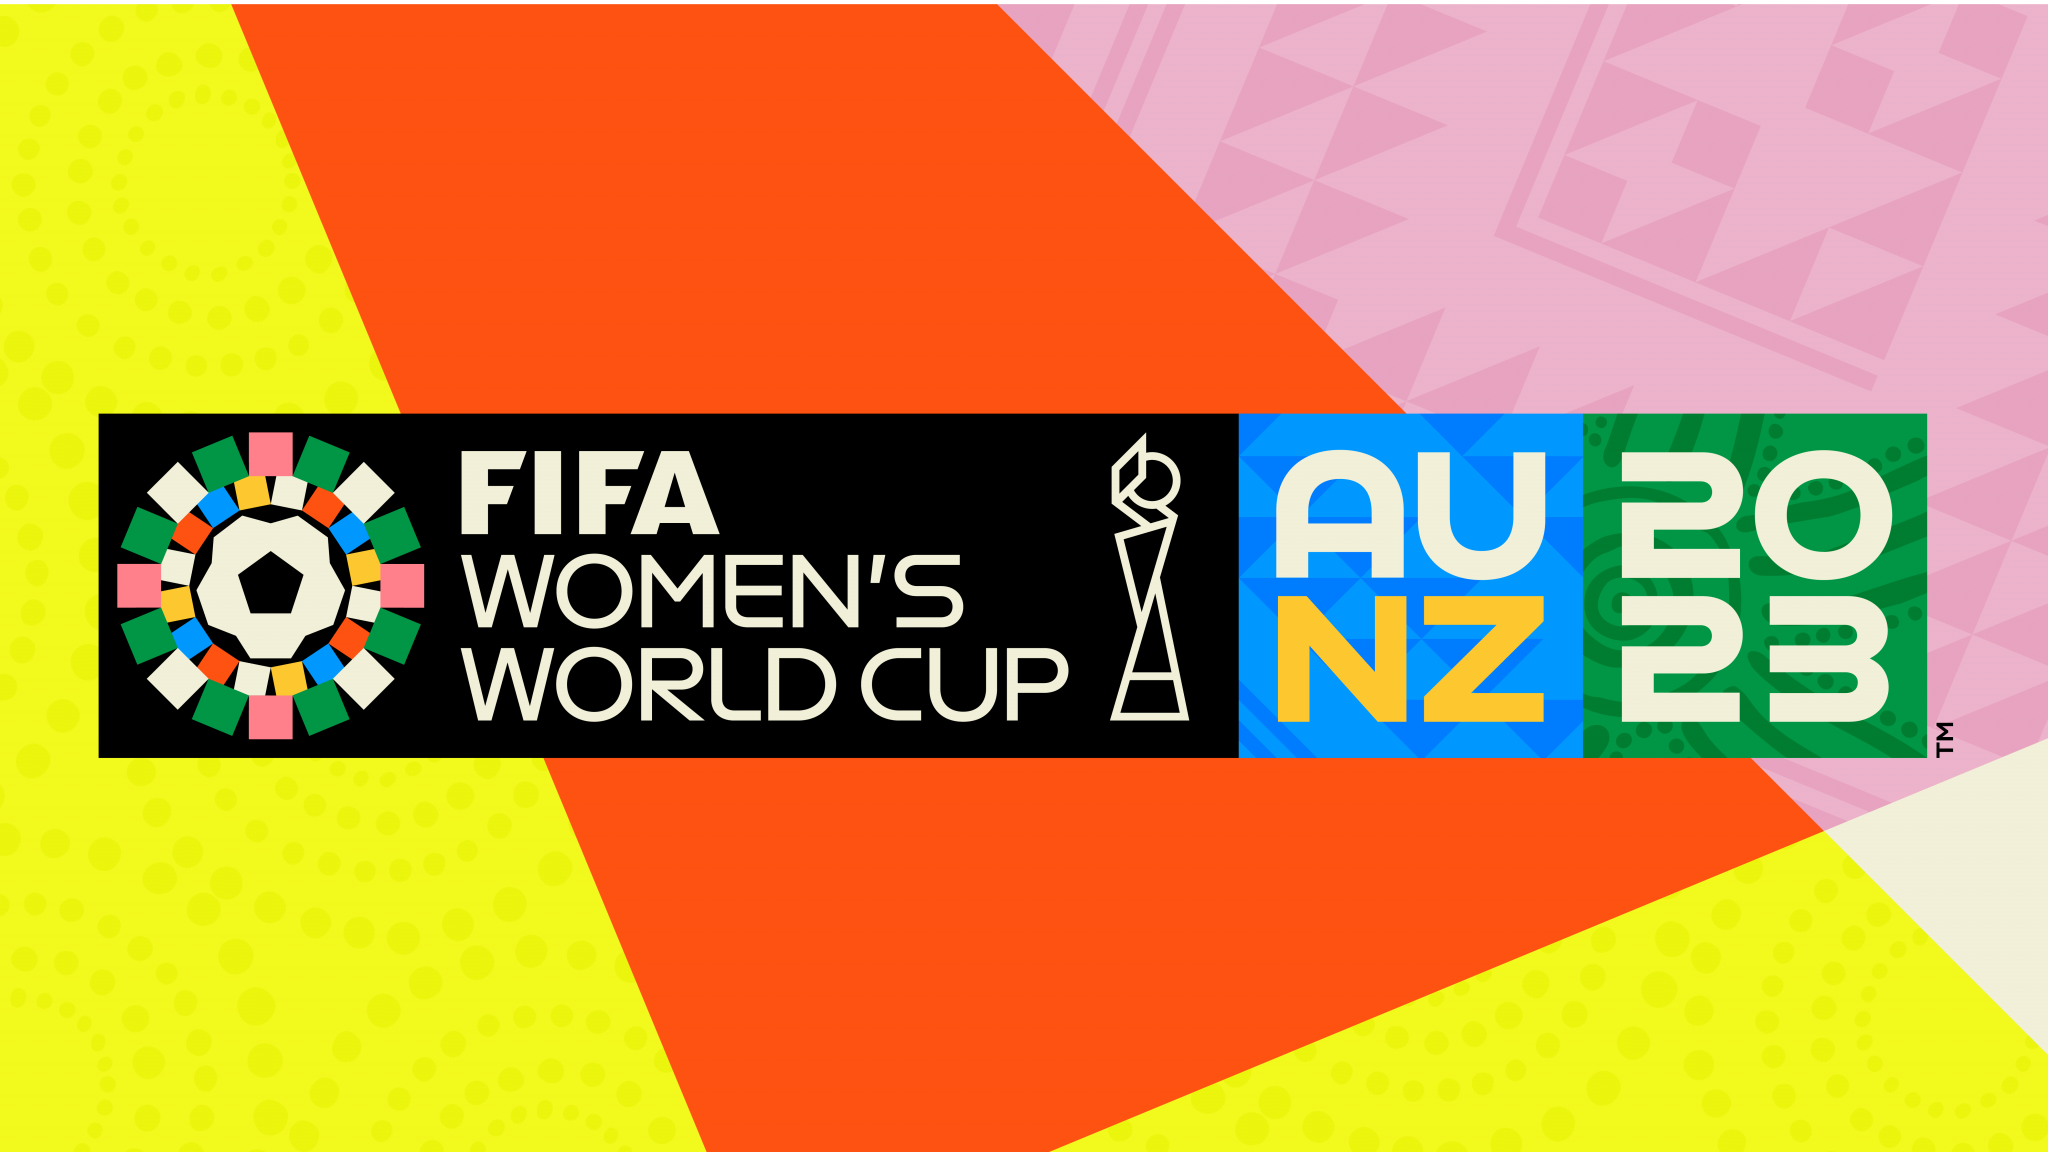 "Beyond Greatness" unveiled as new 2023 FIFA Women's World Cup slogan to headline competition's brand identity